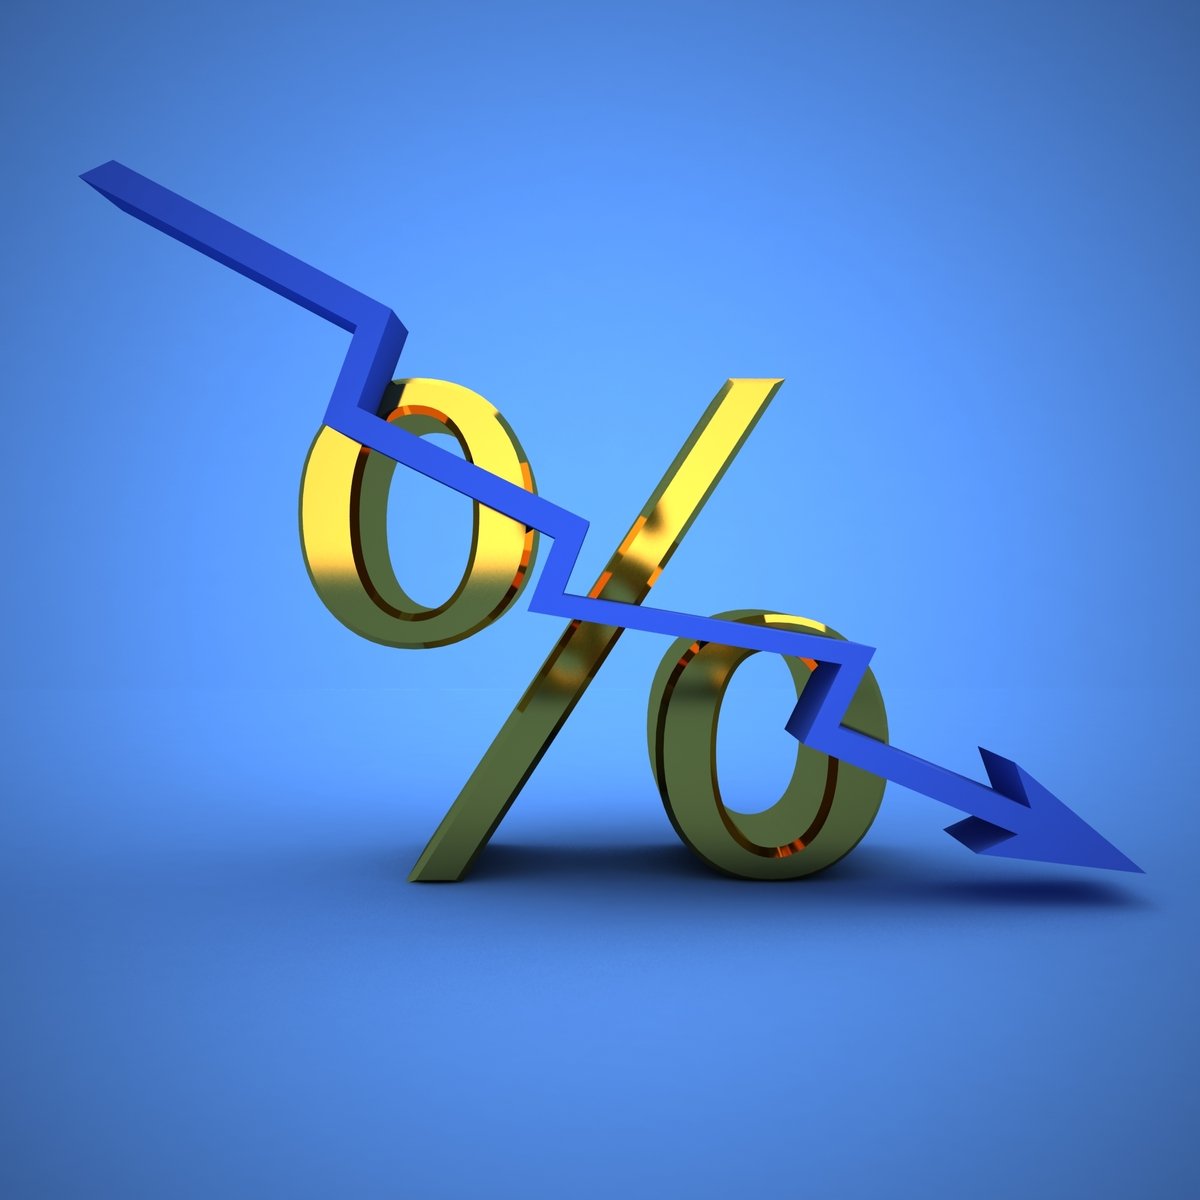 3d rendered gold and blue graph symbol and percent